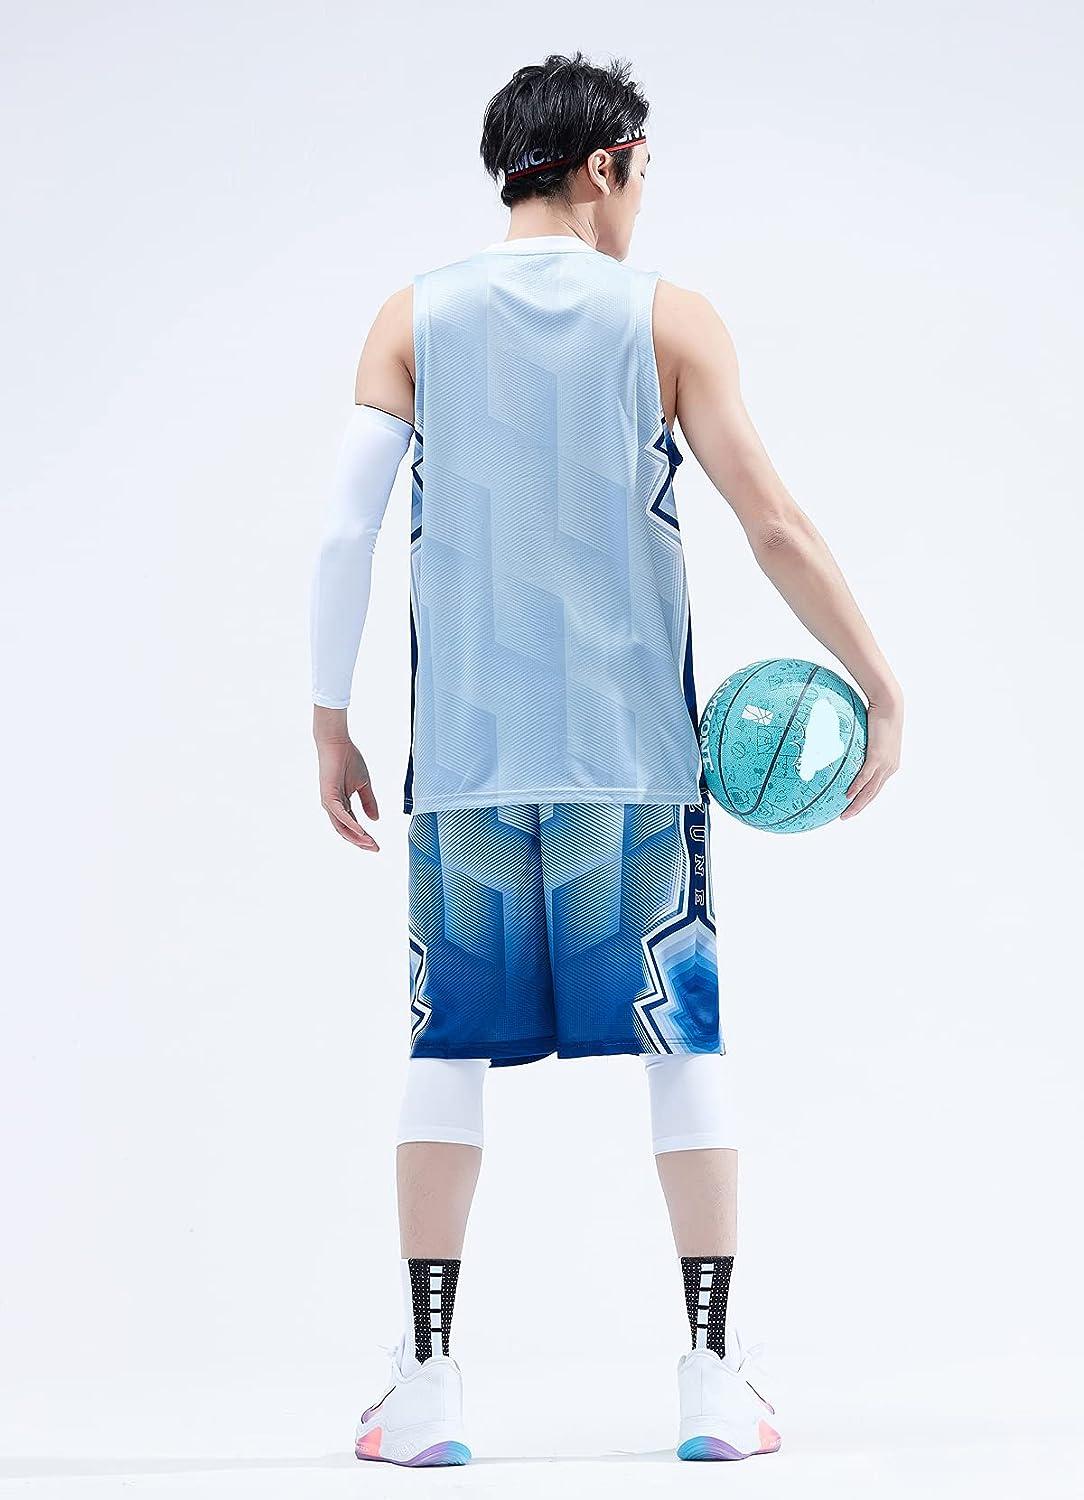 Topeter Mens Basketball Jersey and Shorts Team Uniform with